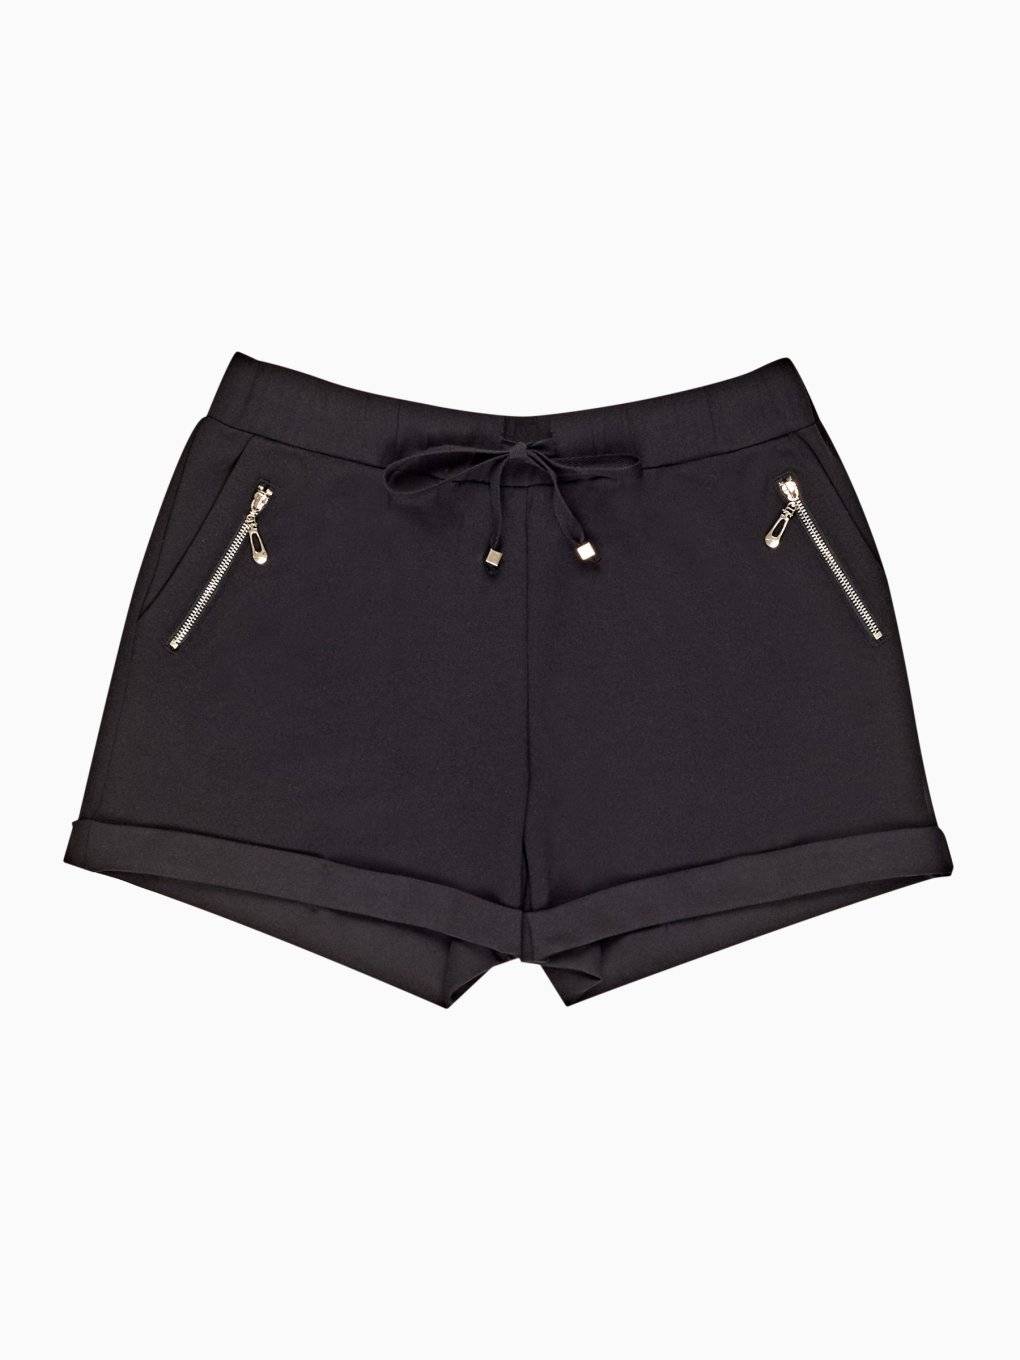 Shorts with decorative zippers